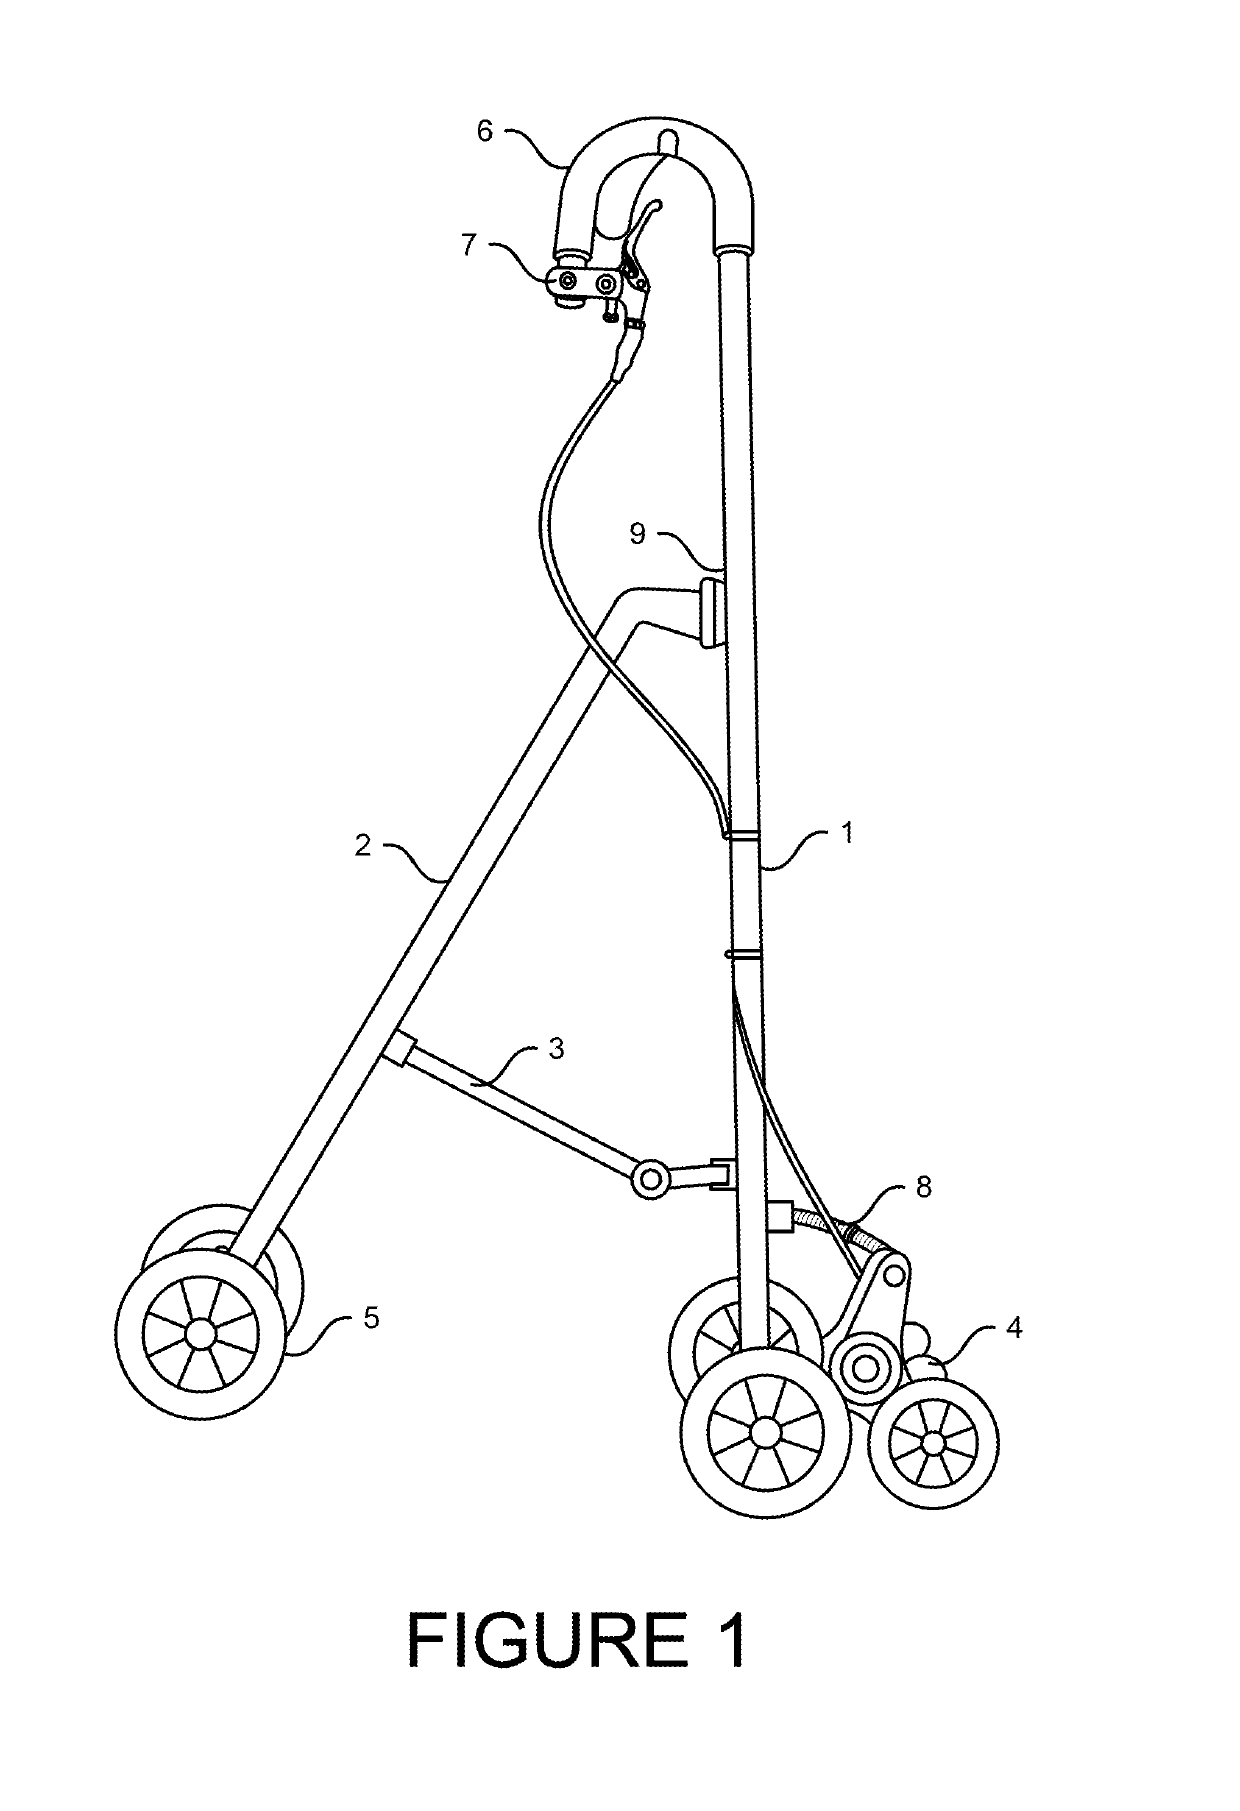 Portable walking aid device with wheels